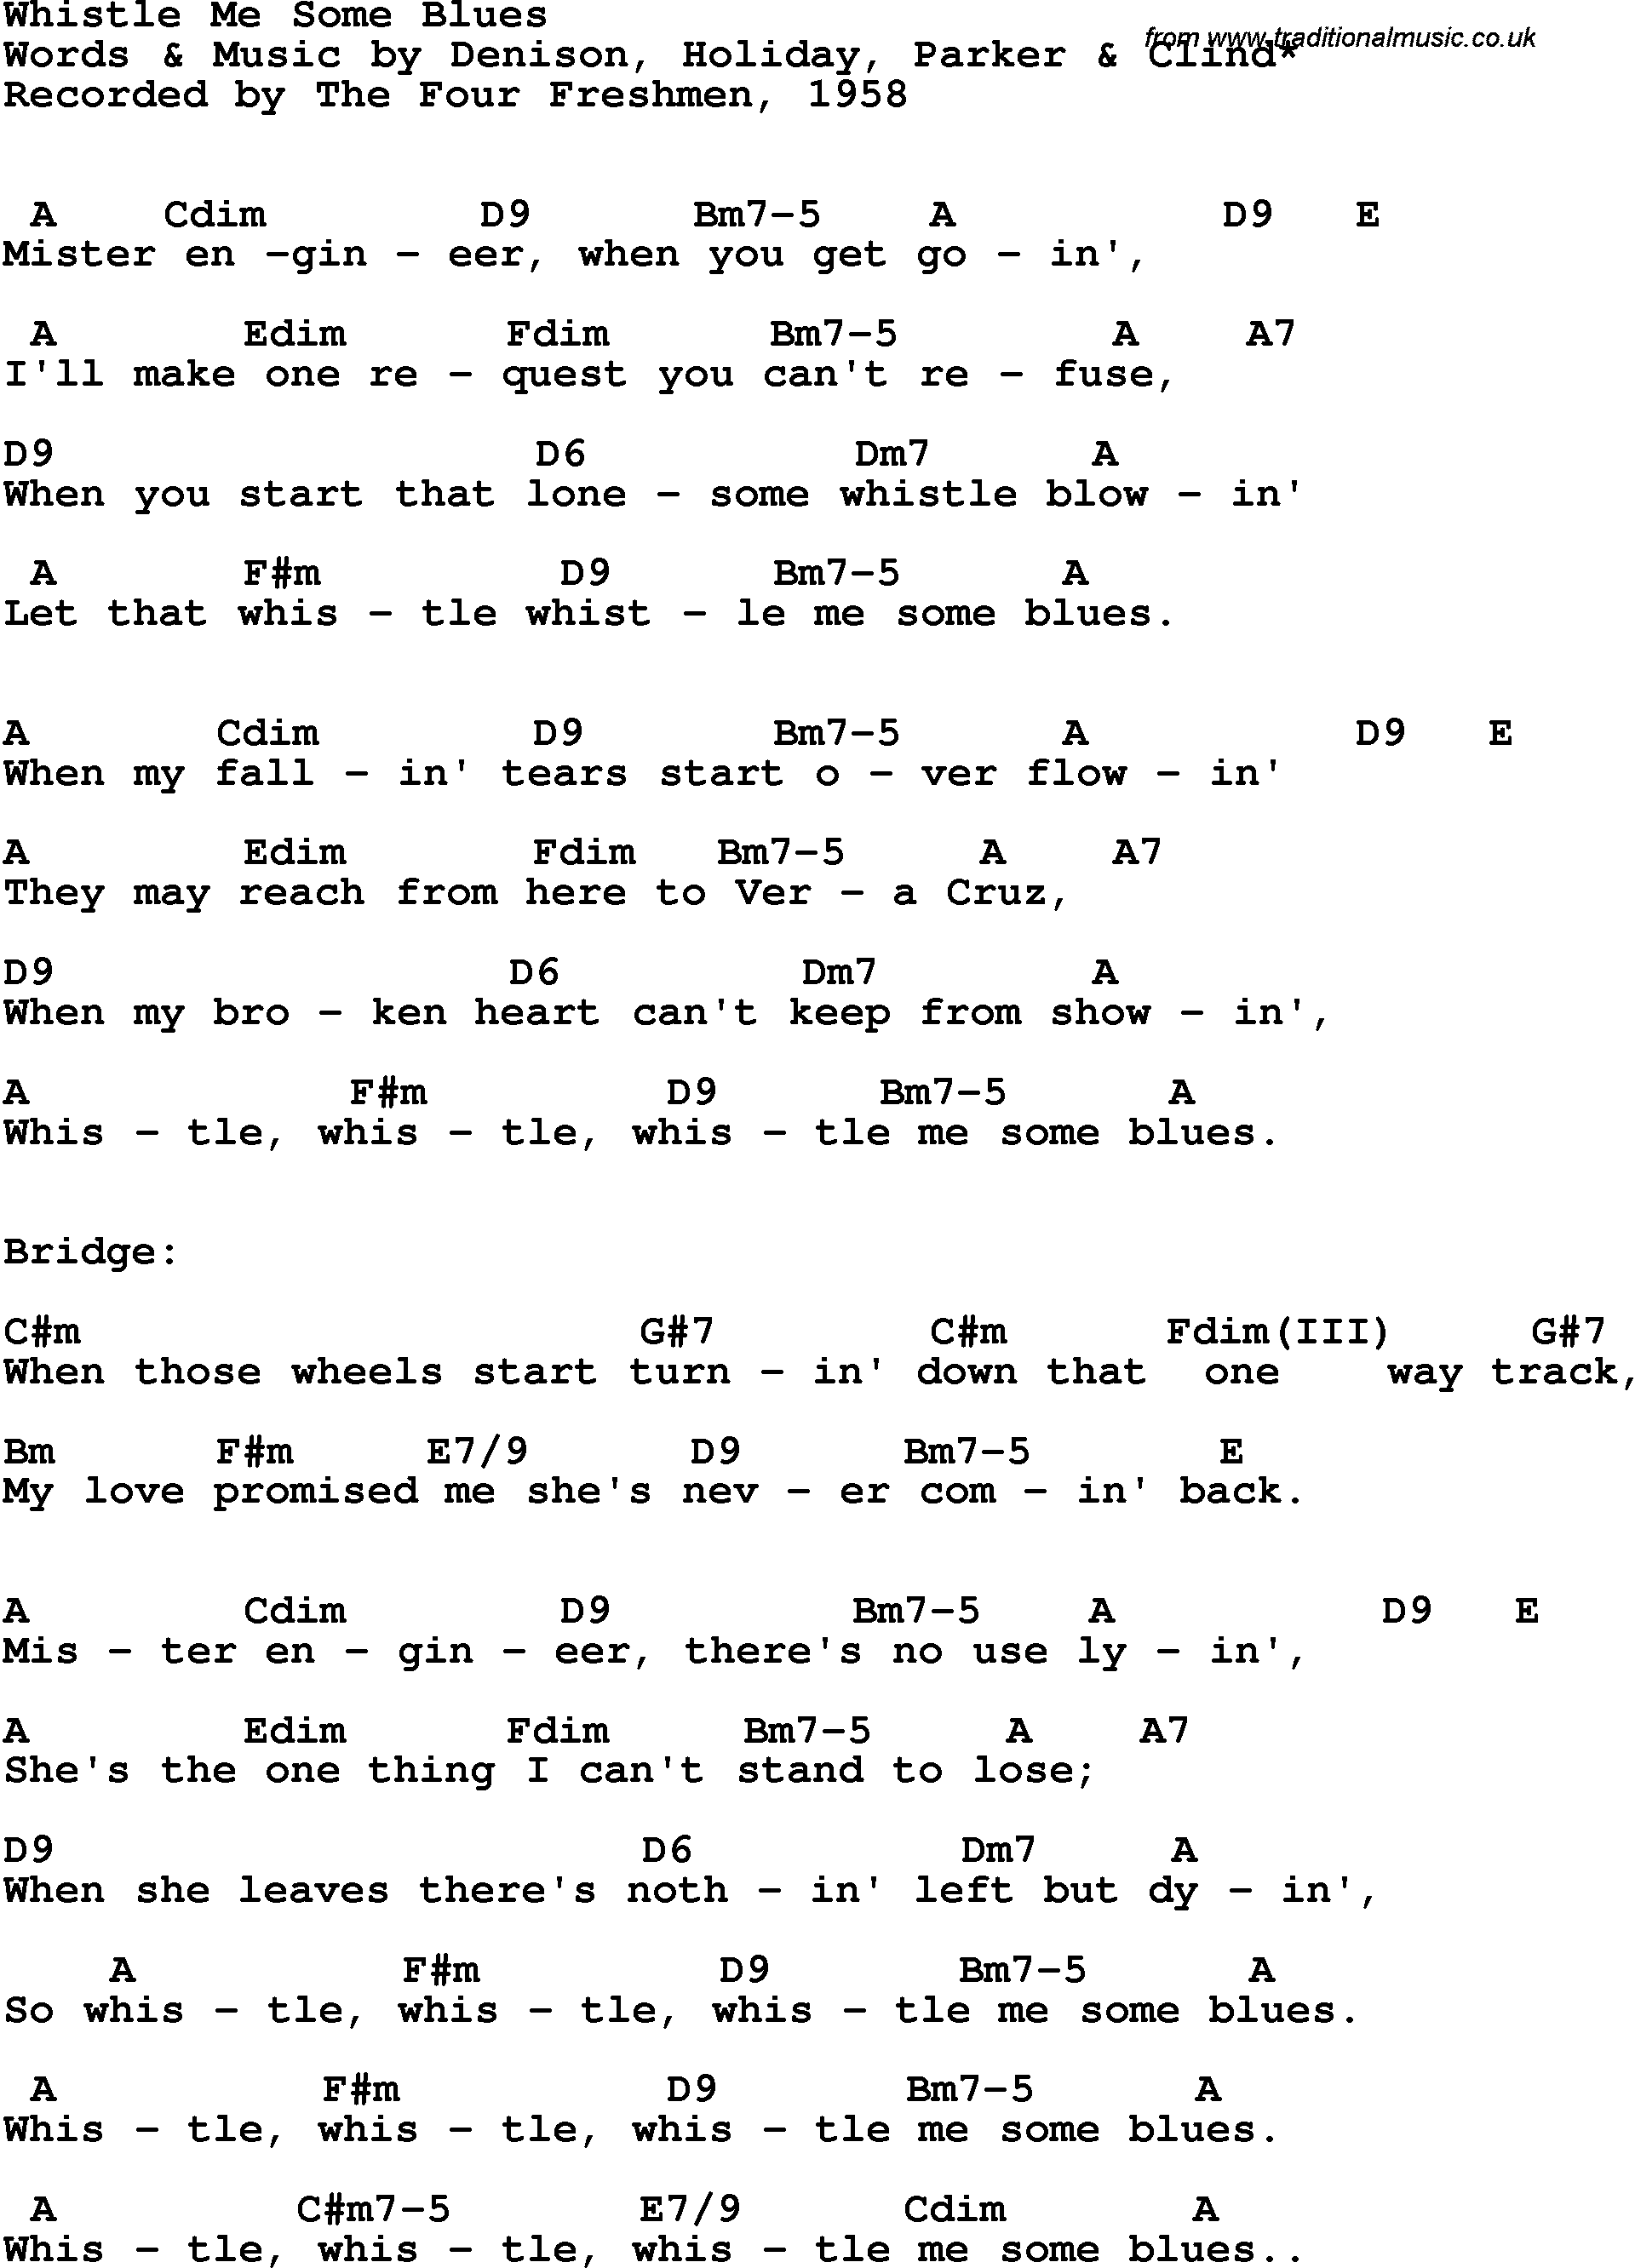 Song Lyrics with guitar chords for Whistle Me Some Blues - The Four Freshmen, 1958